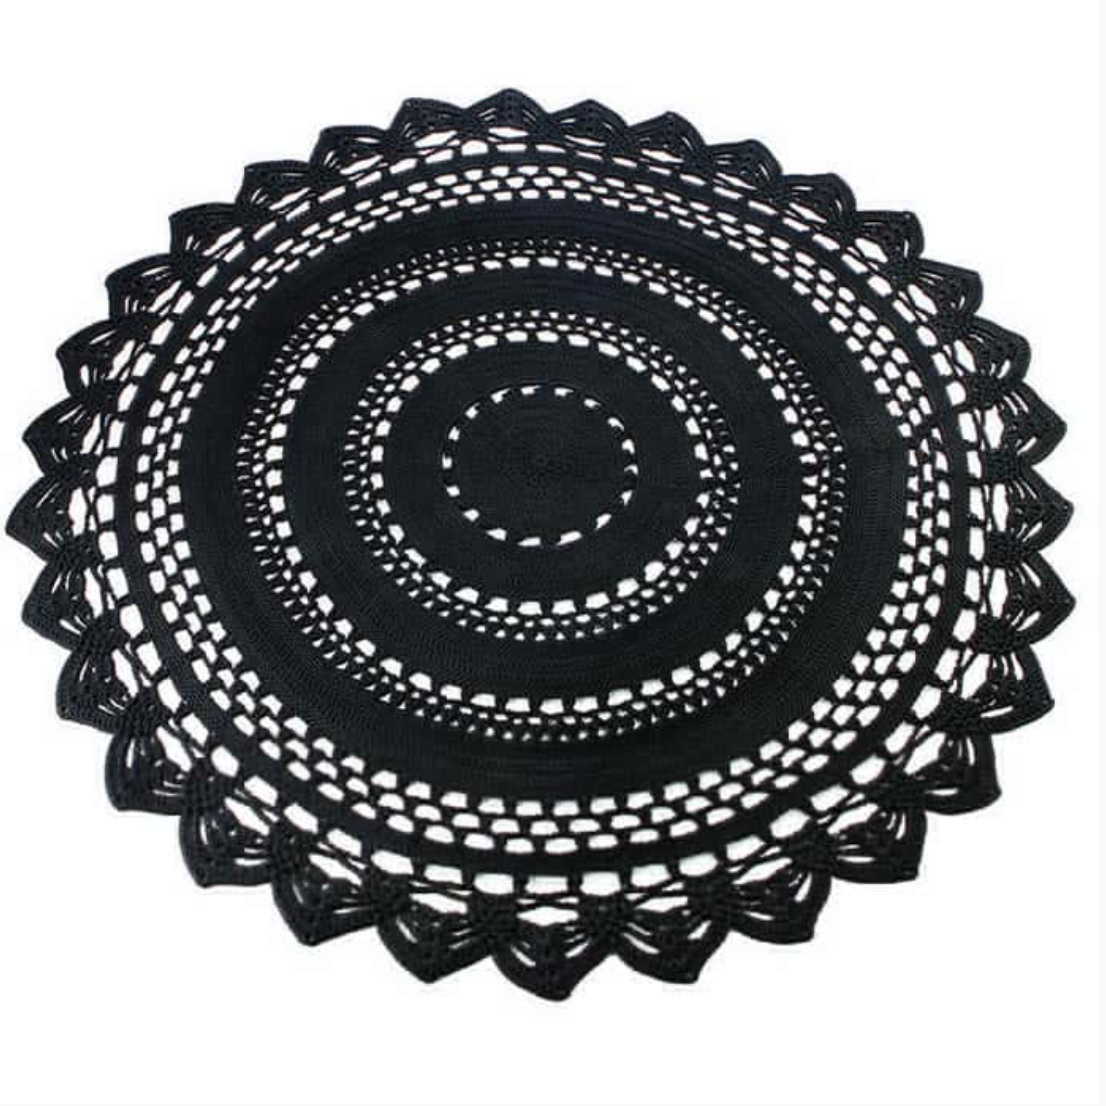 Robala Custom Made Doily Round Rug by Fibre Designs. The Verandah Collection rugs are hard-wearing, elegant and luxurious, suitable for both indoor or outdoor & easy to maintain.